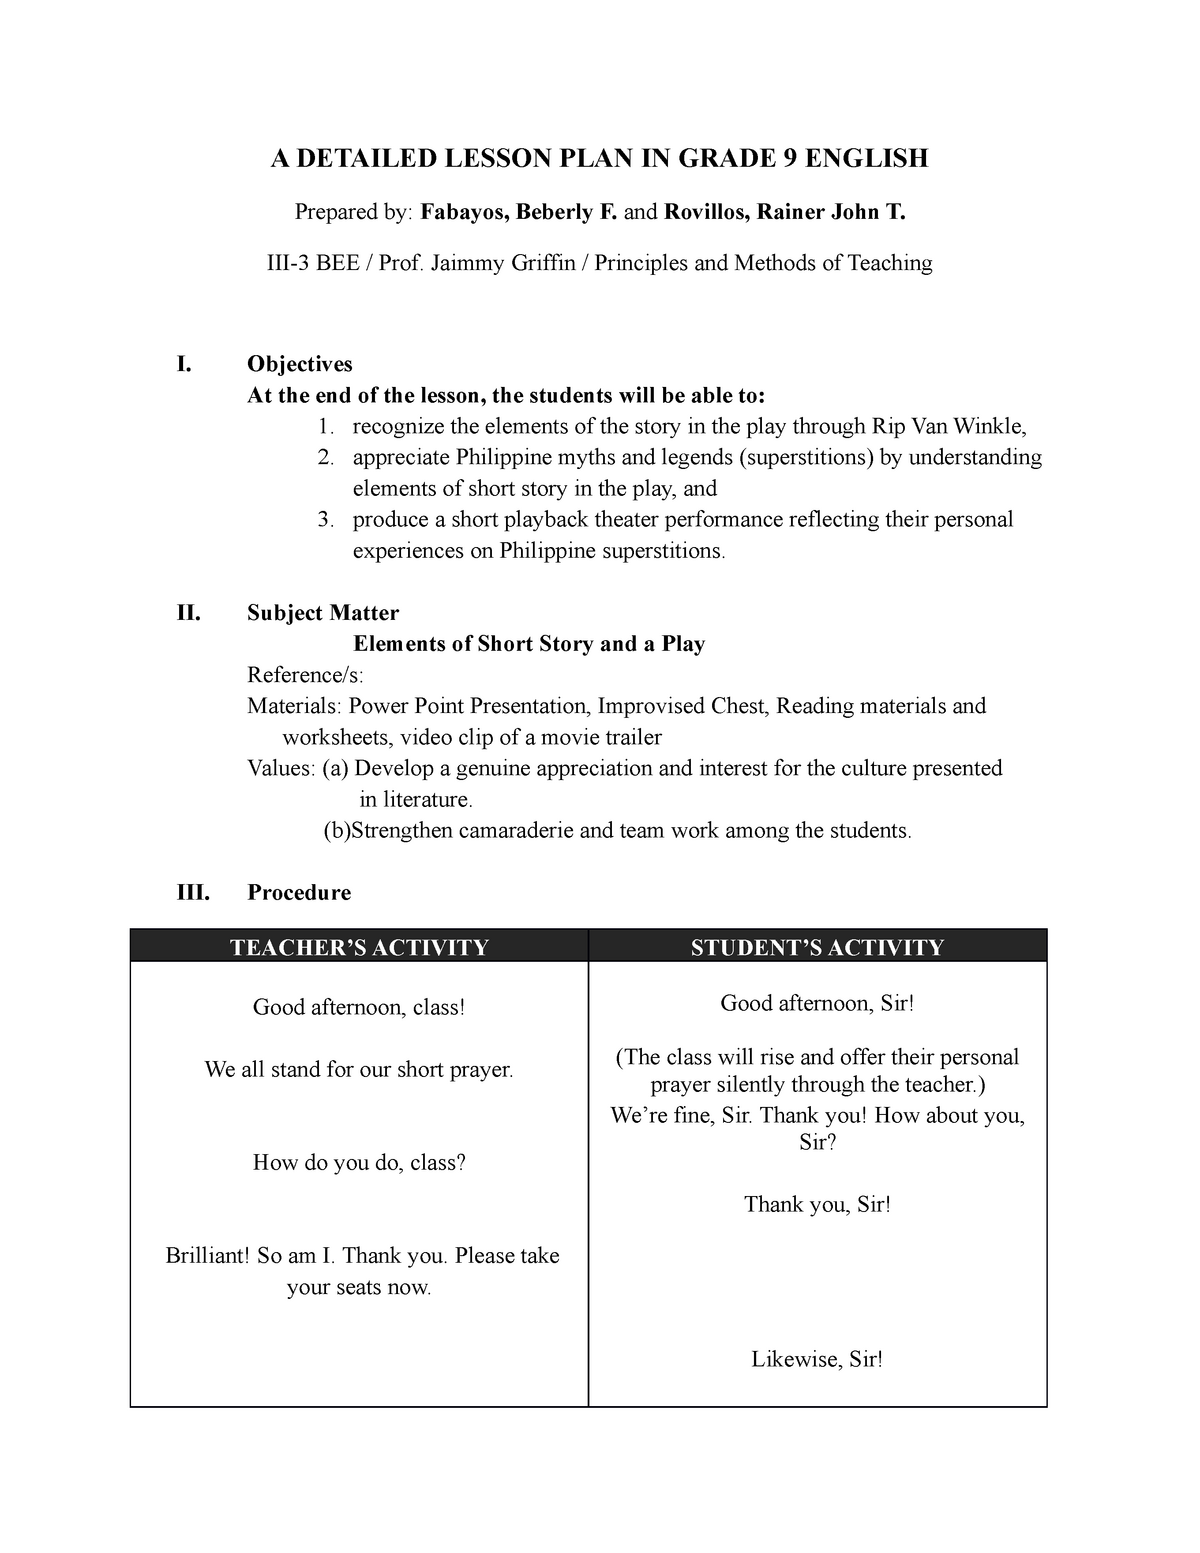 detailed-lesson-plan-grade-10-a-detailed-lesson-plan-in-english-grade